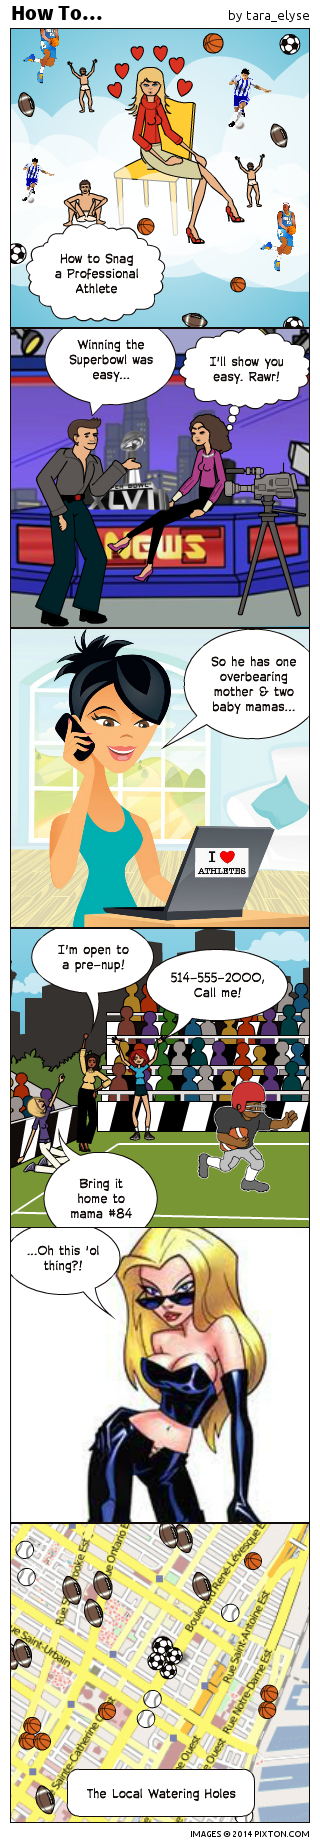 Pixton_Comic_How_To_by_tara_elyse.png